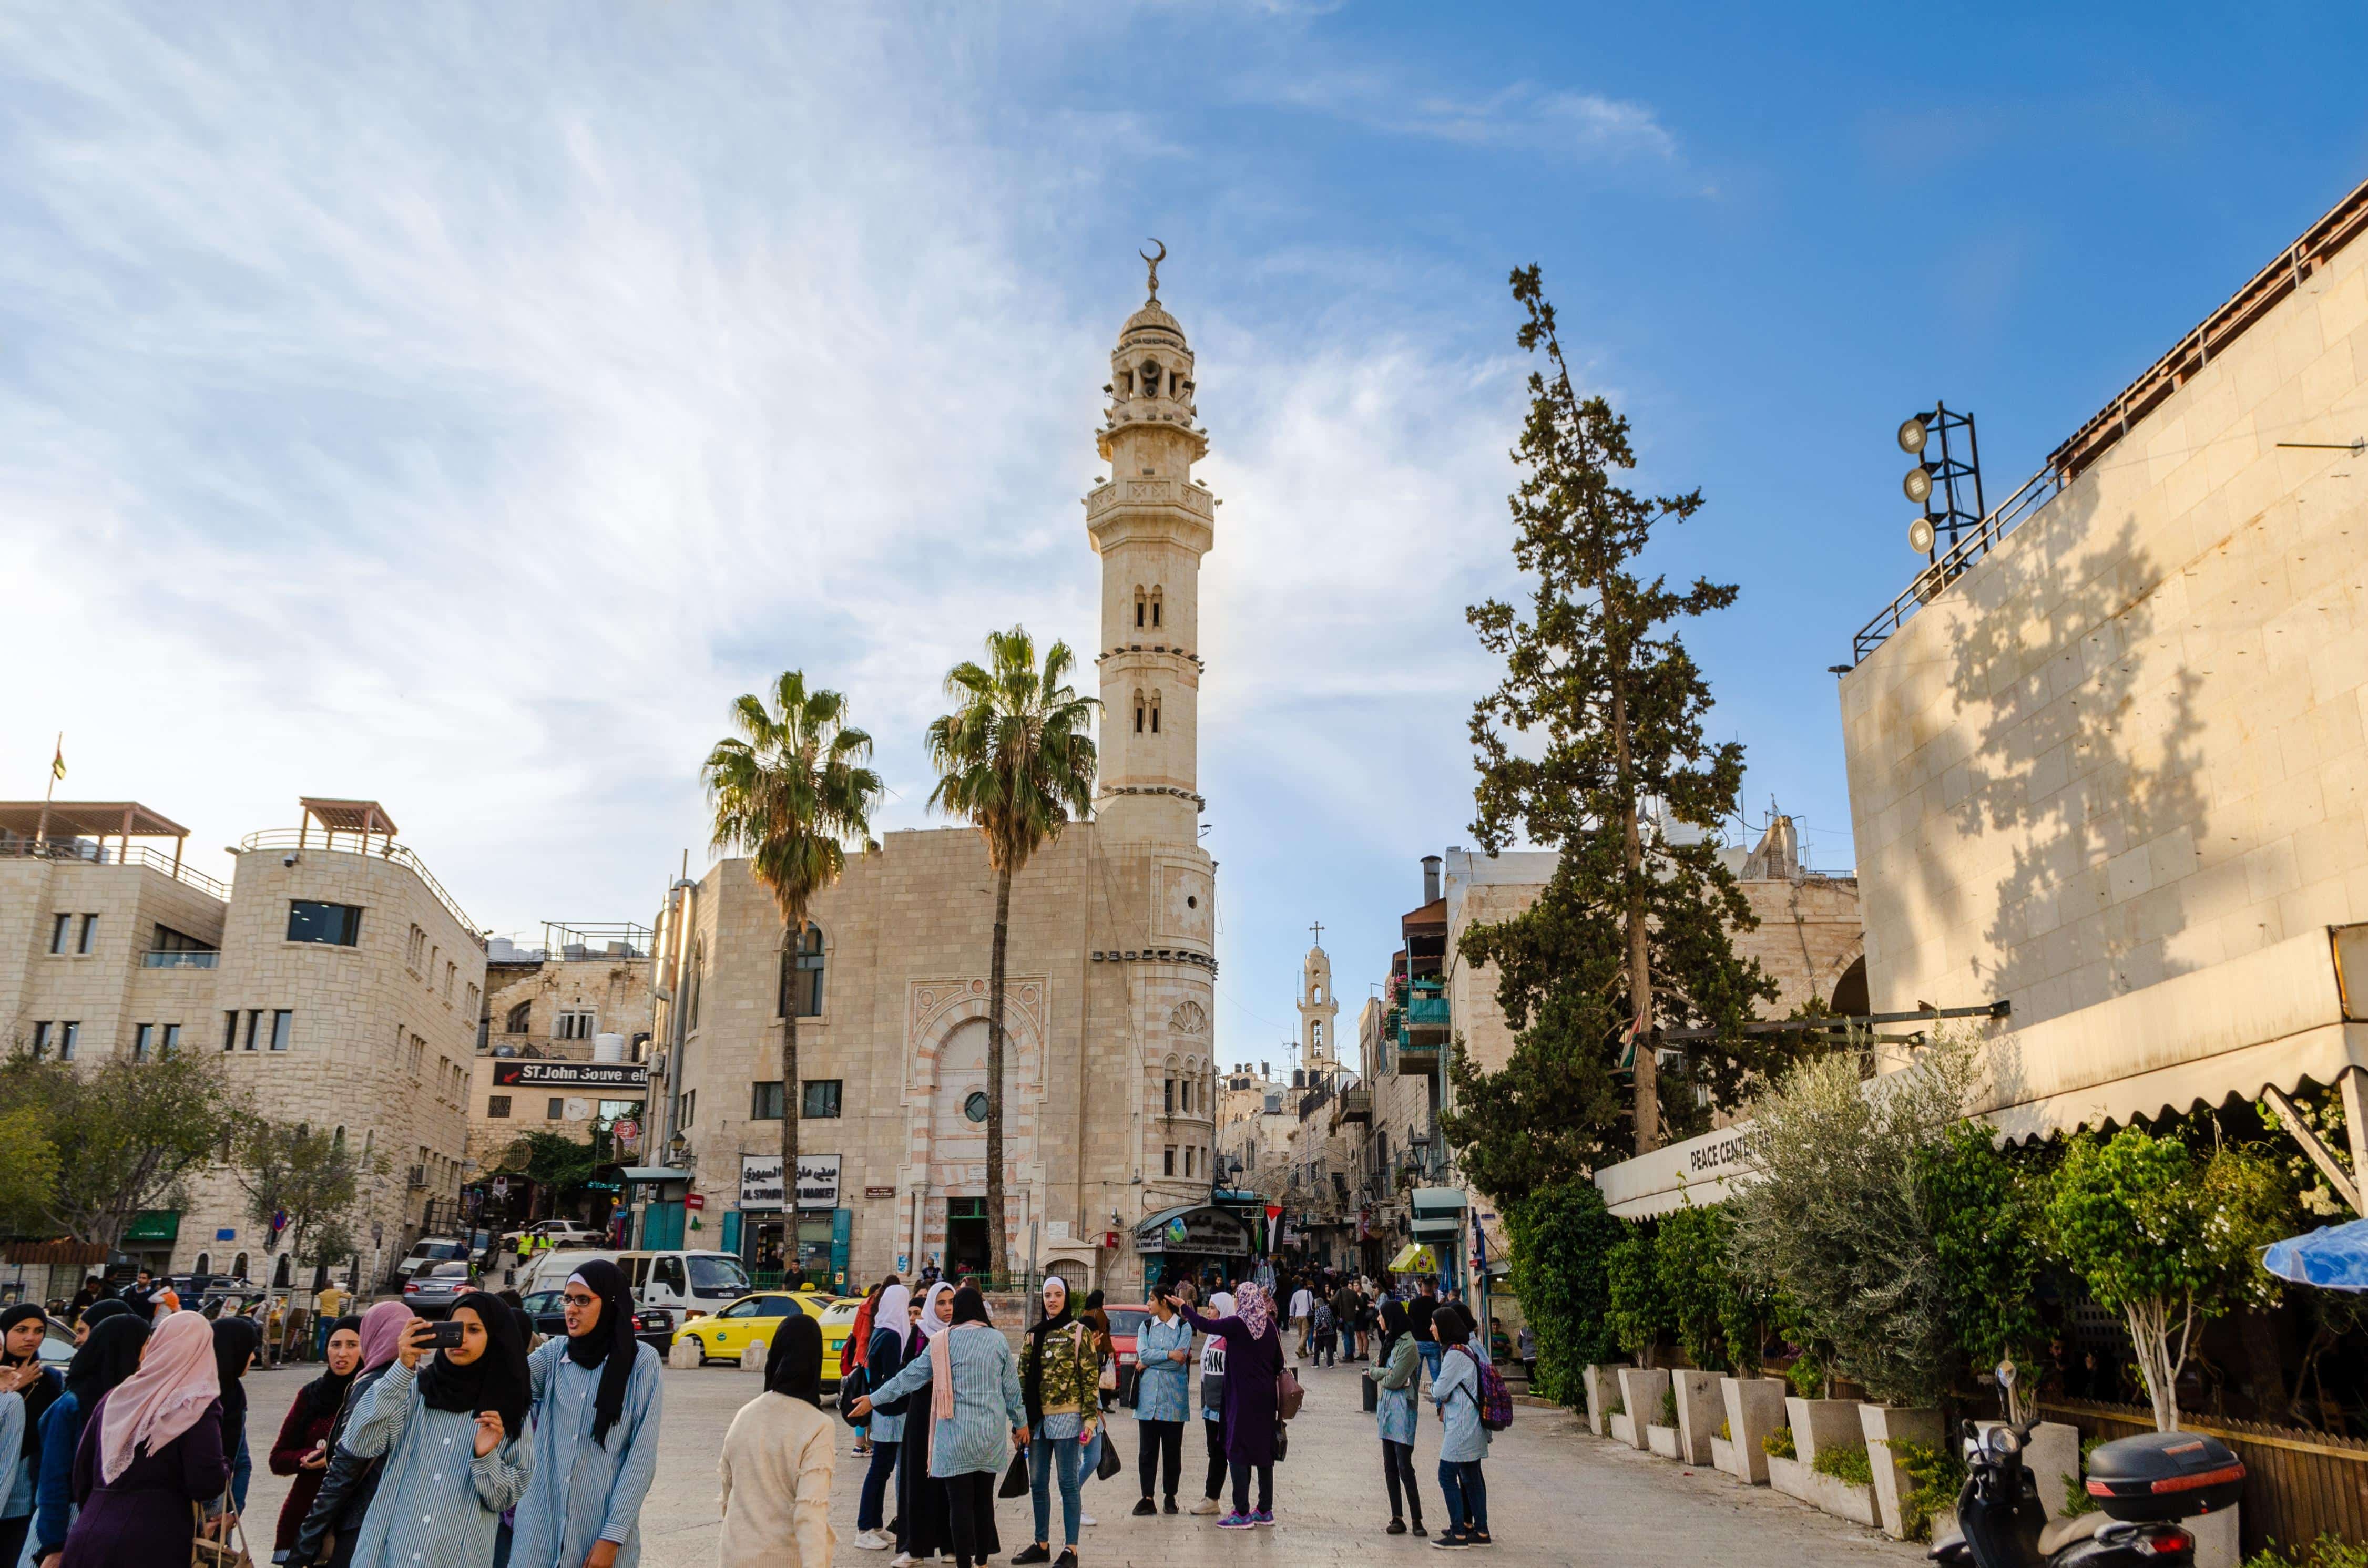 Bethlehem, Palestine - December 19 2019: View of the Mosque of Omar (Umar). The Omar Mosque is the oldest in the city of Bethlehem. People walking through the city center and sightseeing.